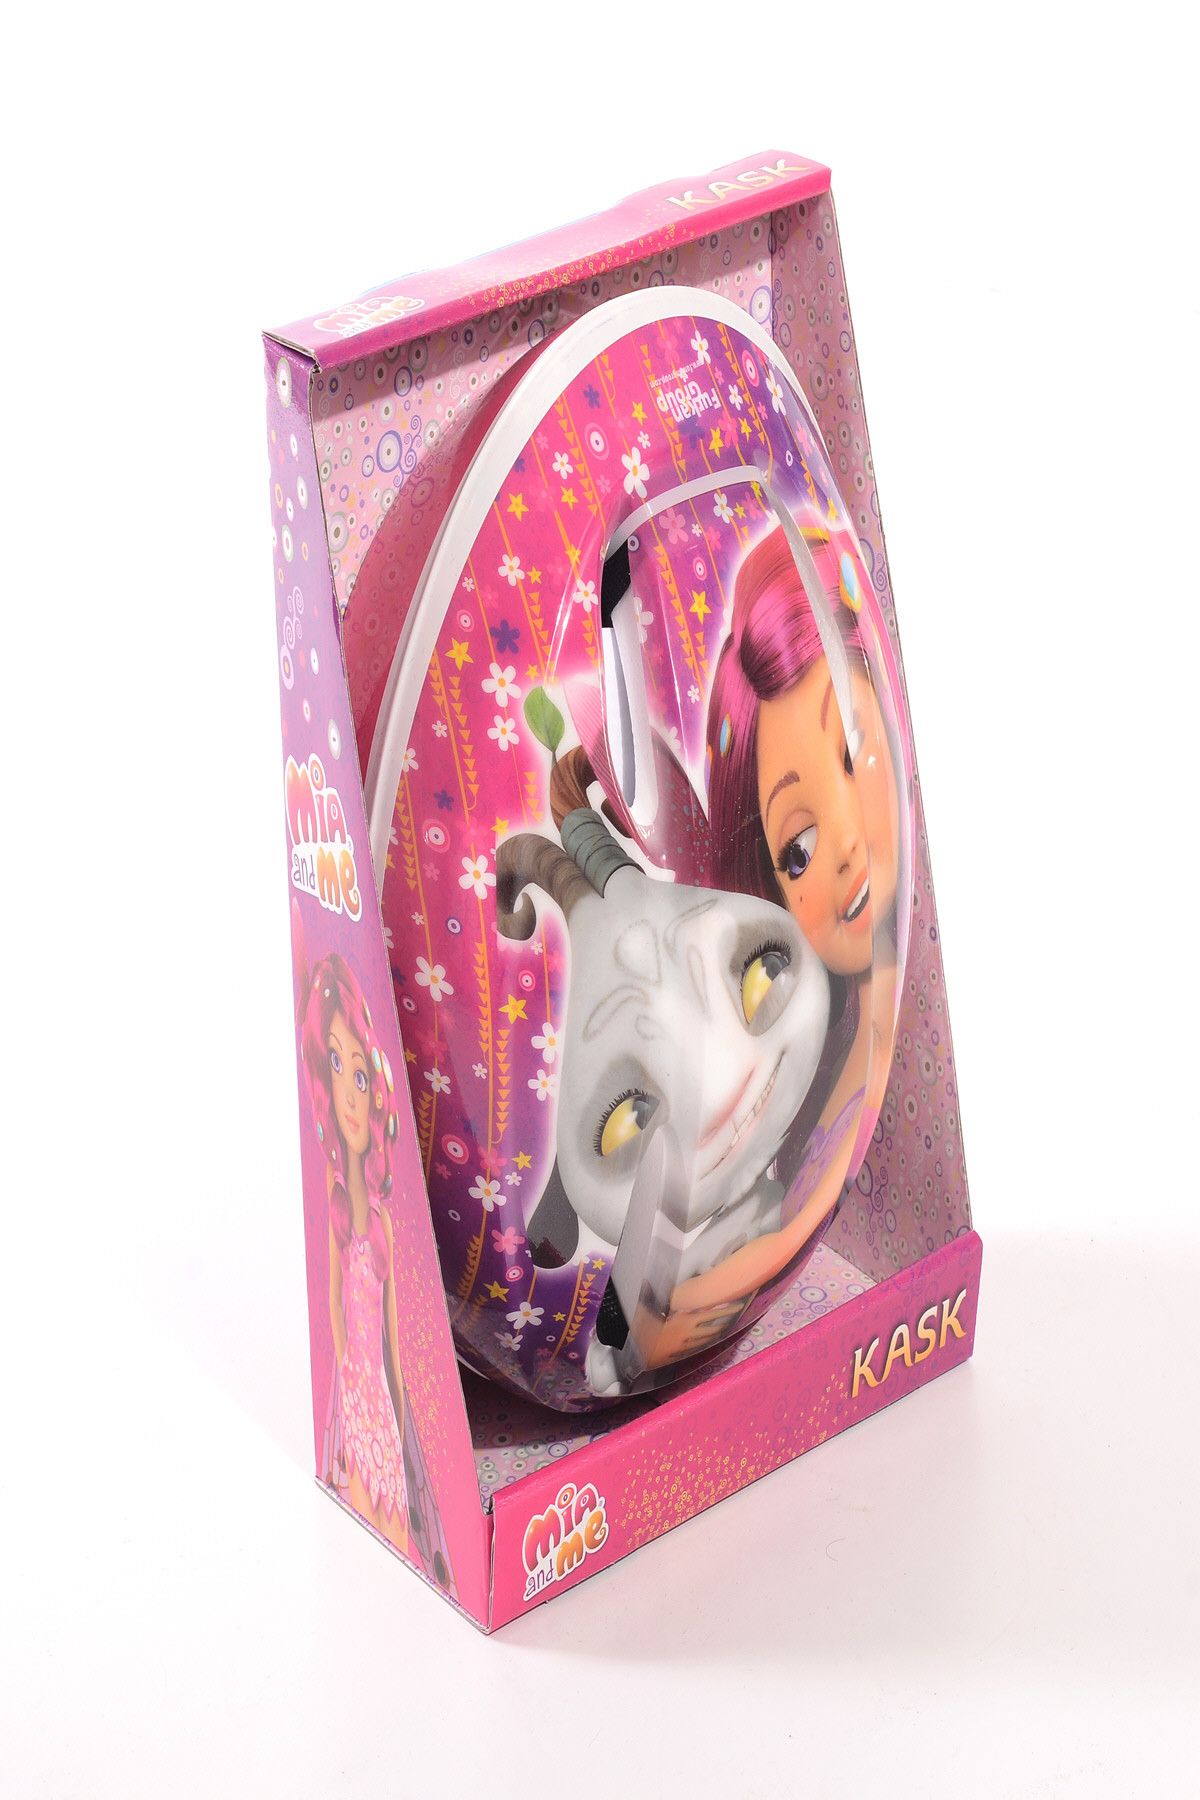 Furkan Toys Mia And Me Kask 54514